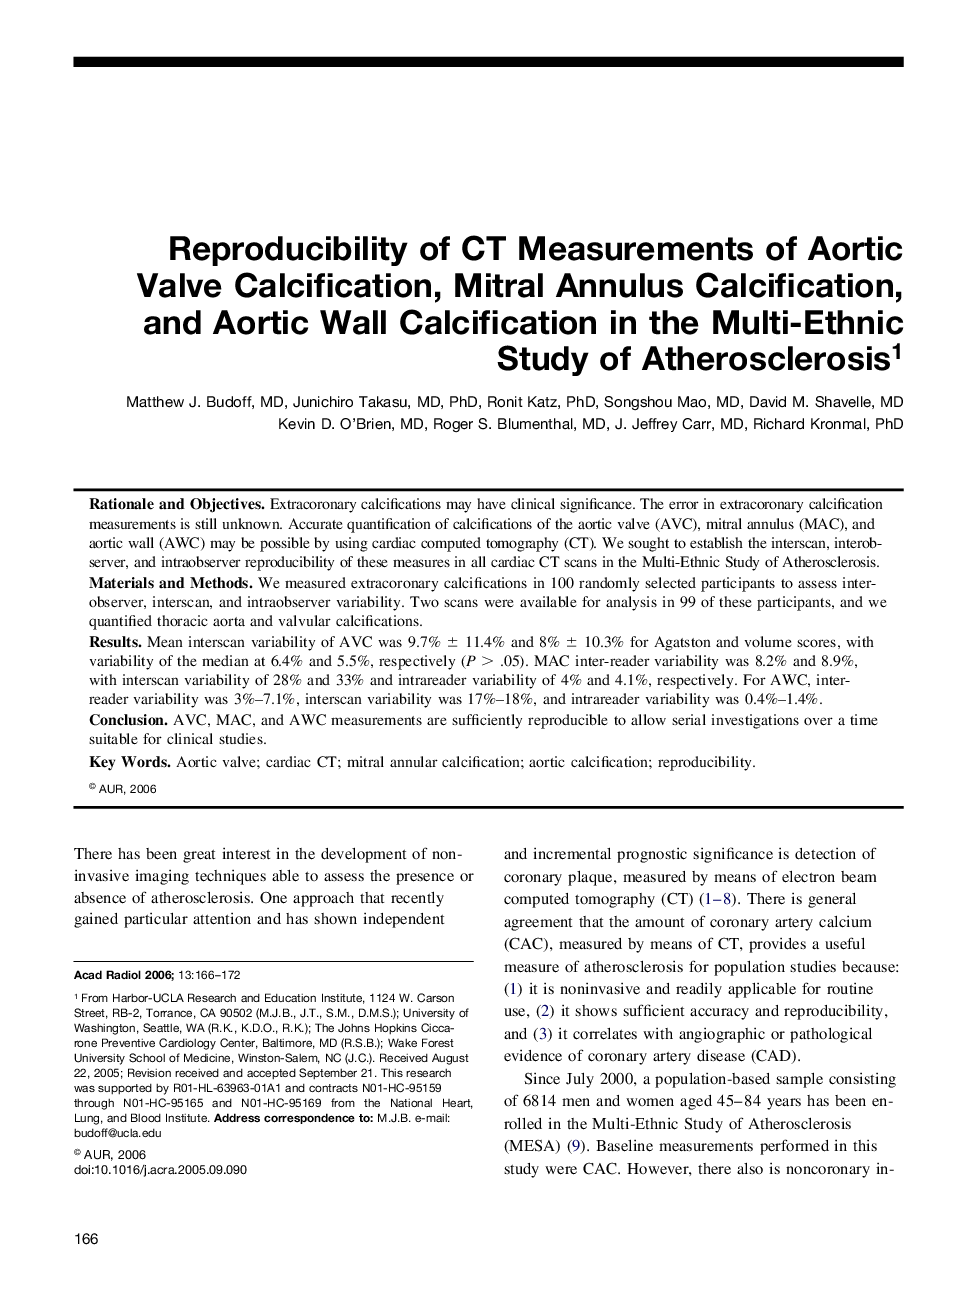 Reproducibility of CT Measurements of Aortic Valve Calcification, Mitral Annulus Calcification, and Aortic Wall Calcification in the Multi-Ethnic Study of Atherosclerosis